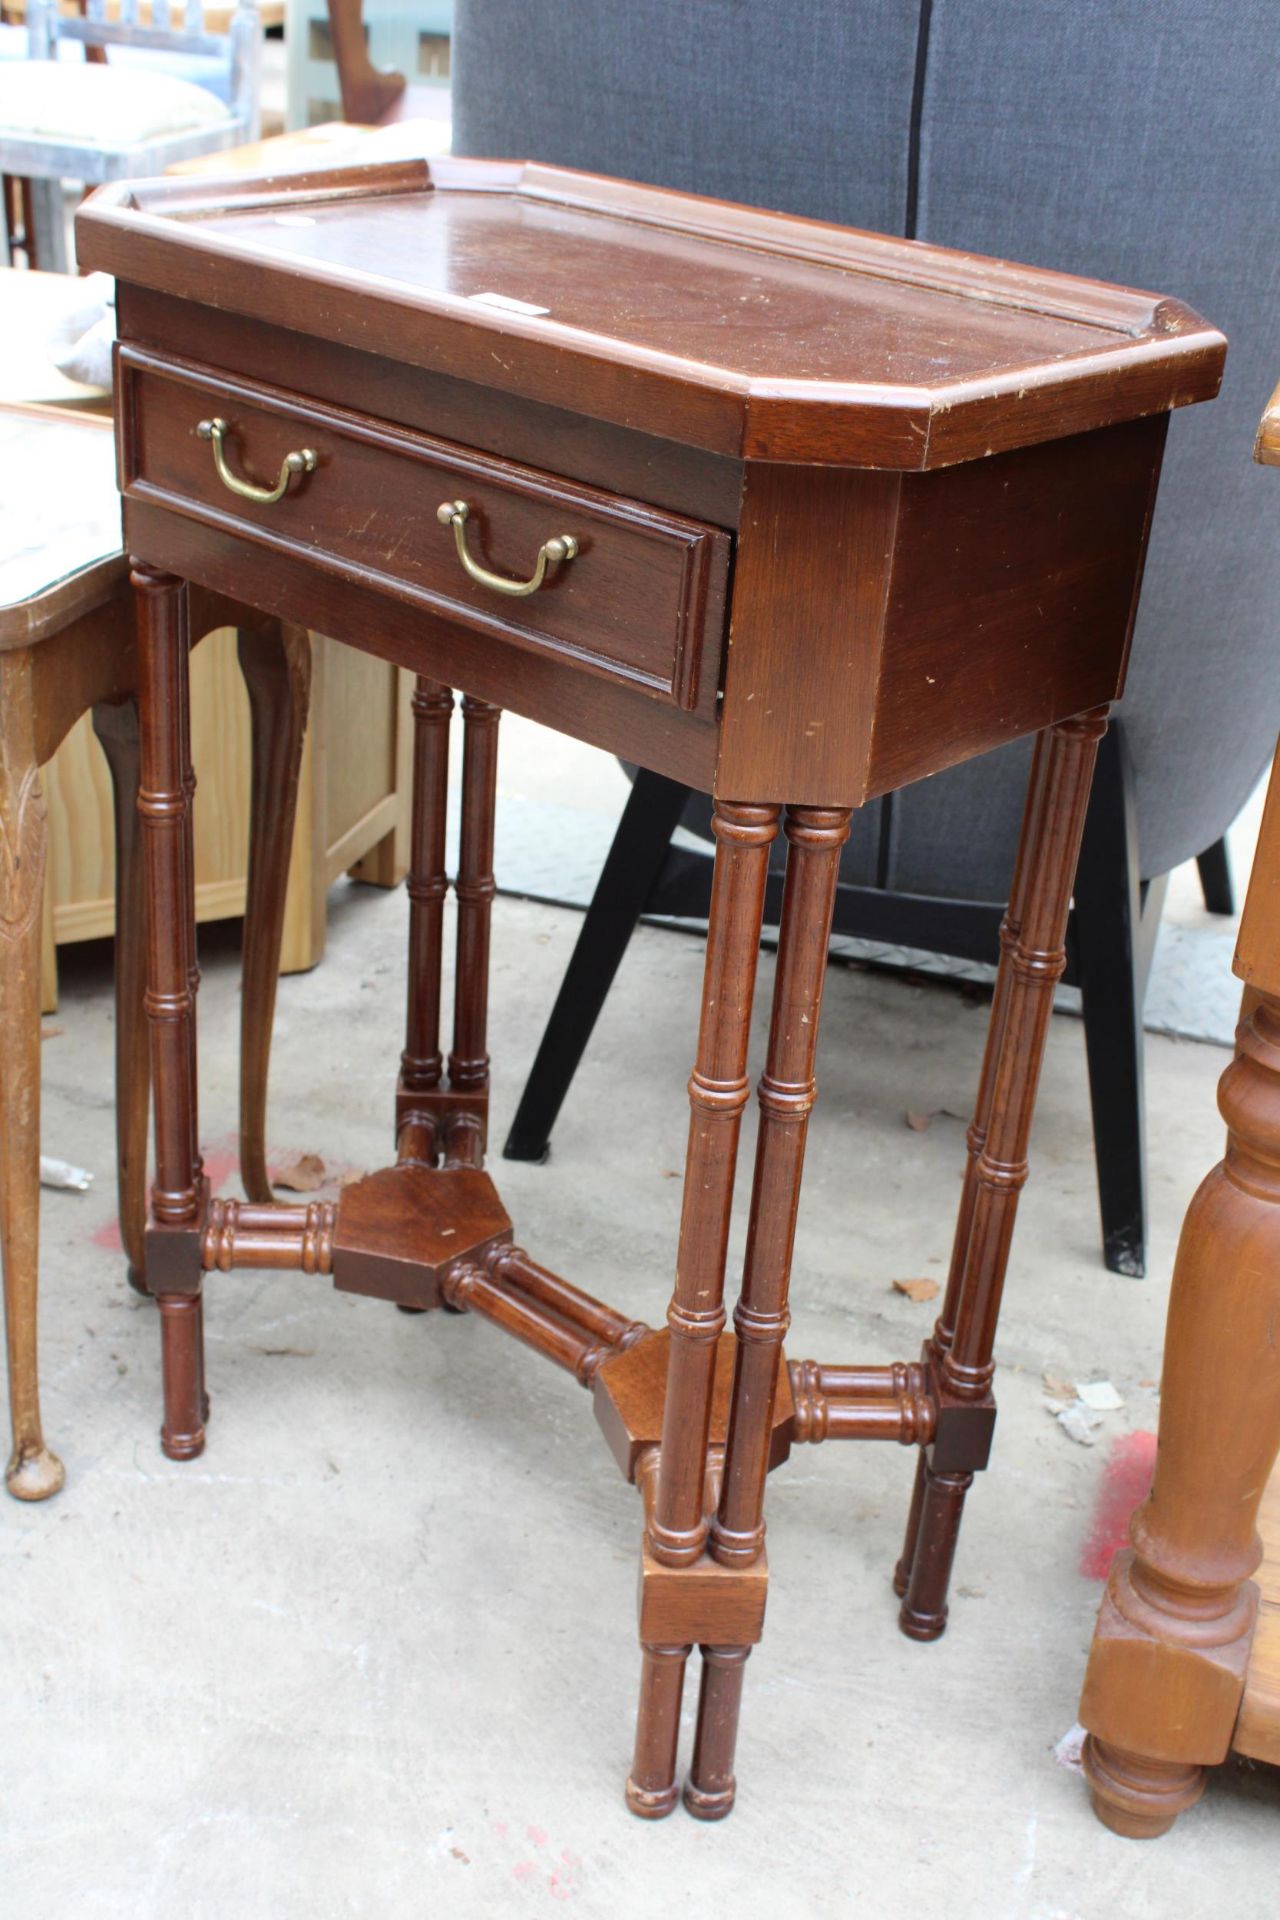 A MAHOGANY SIDE TABLE WITH CANTED CORNERS, SINGLE DRAWER AND MULTIPLE TURNED LEGS AND STRETCHERS - Bild 2 aus 2